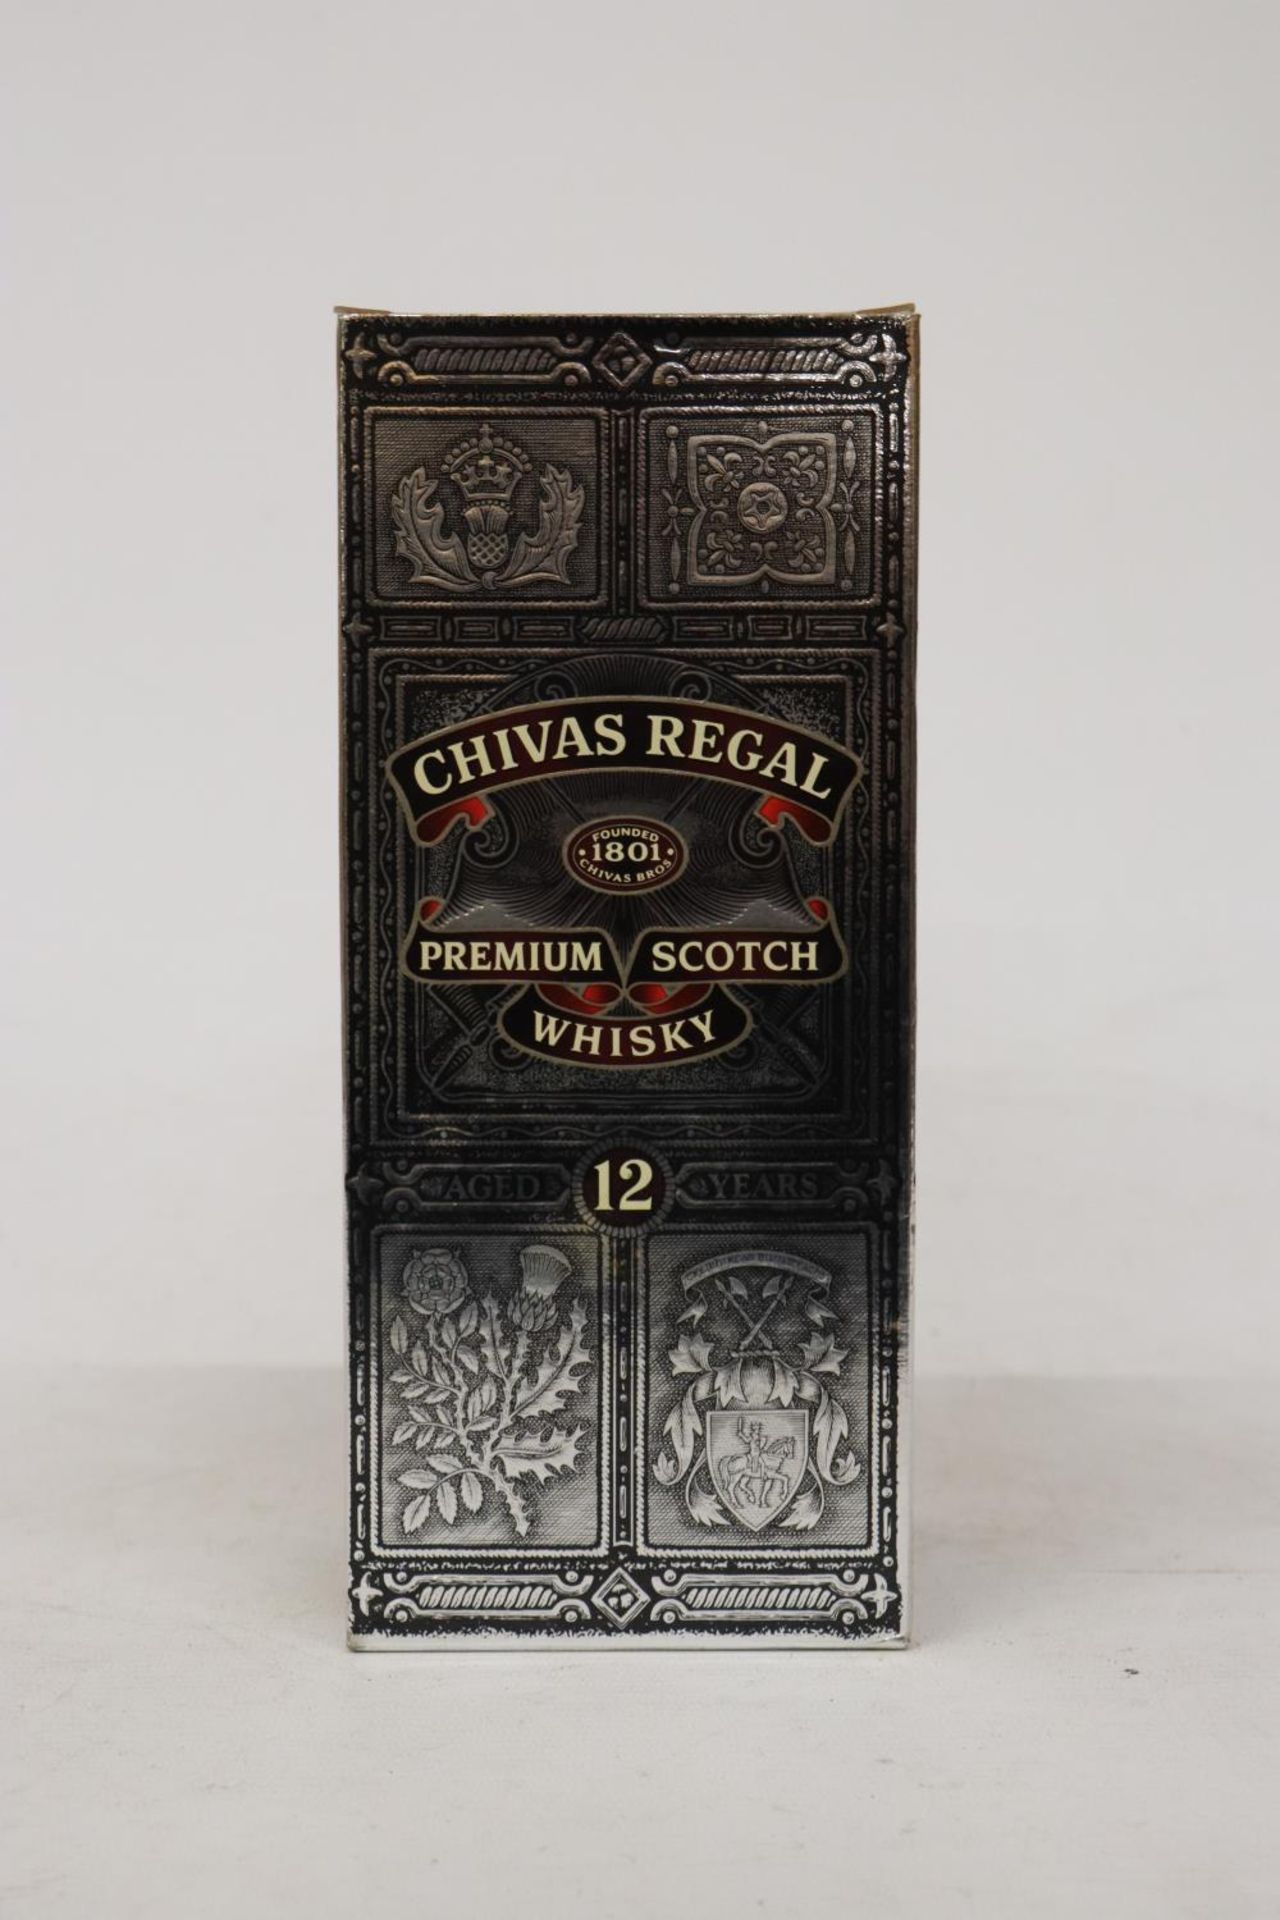 A BOTTLE OF CHIVAS REGAL 12 YEAR OLD WHISKY, BOXED - Image 5 of 5